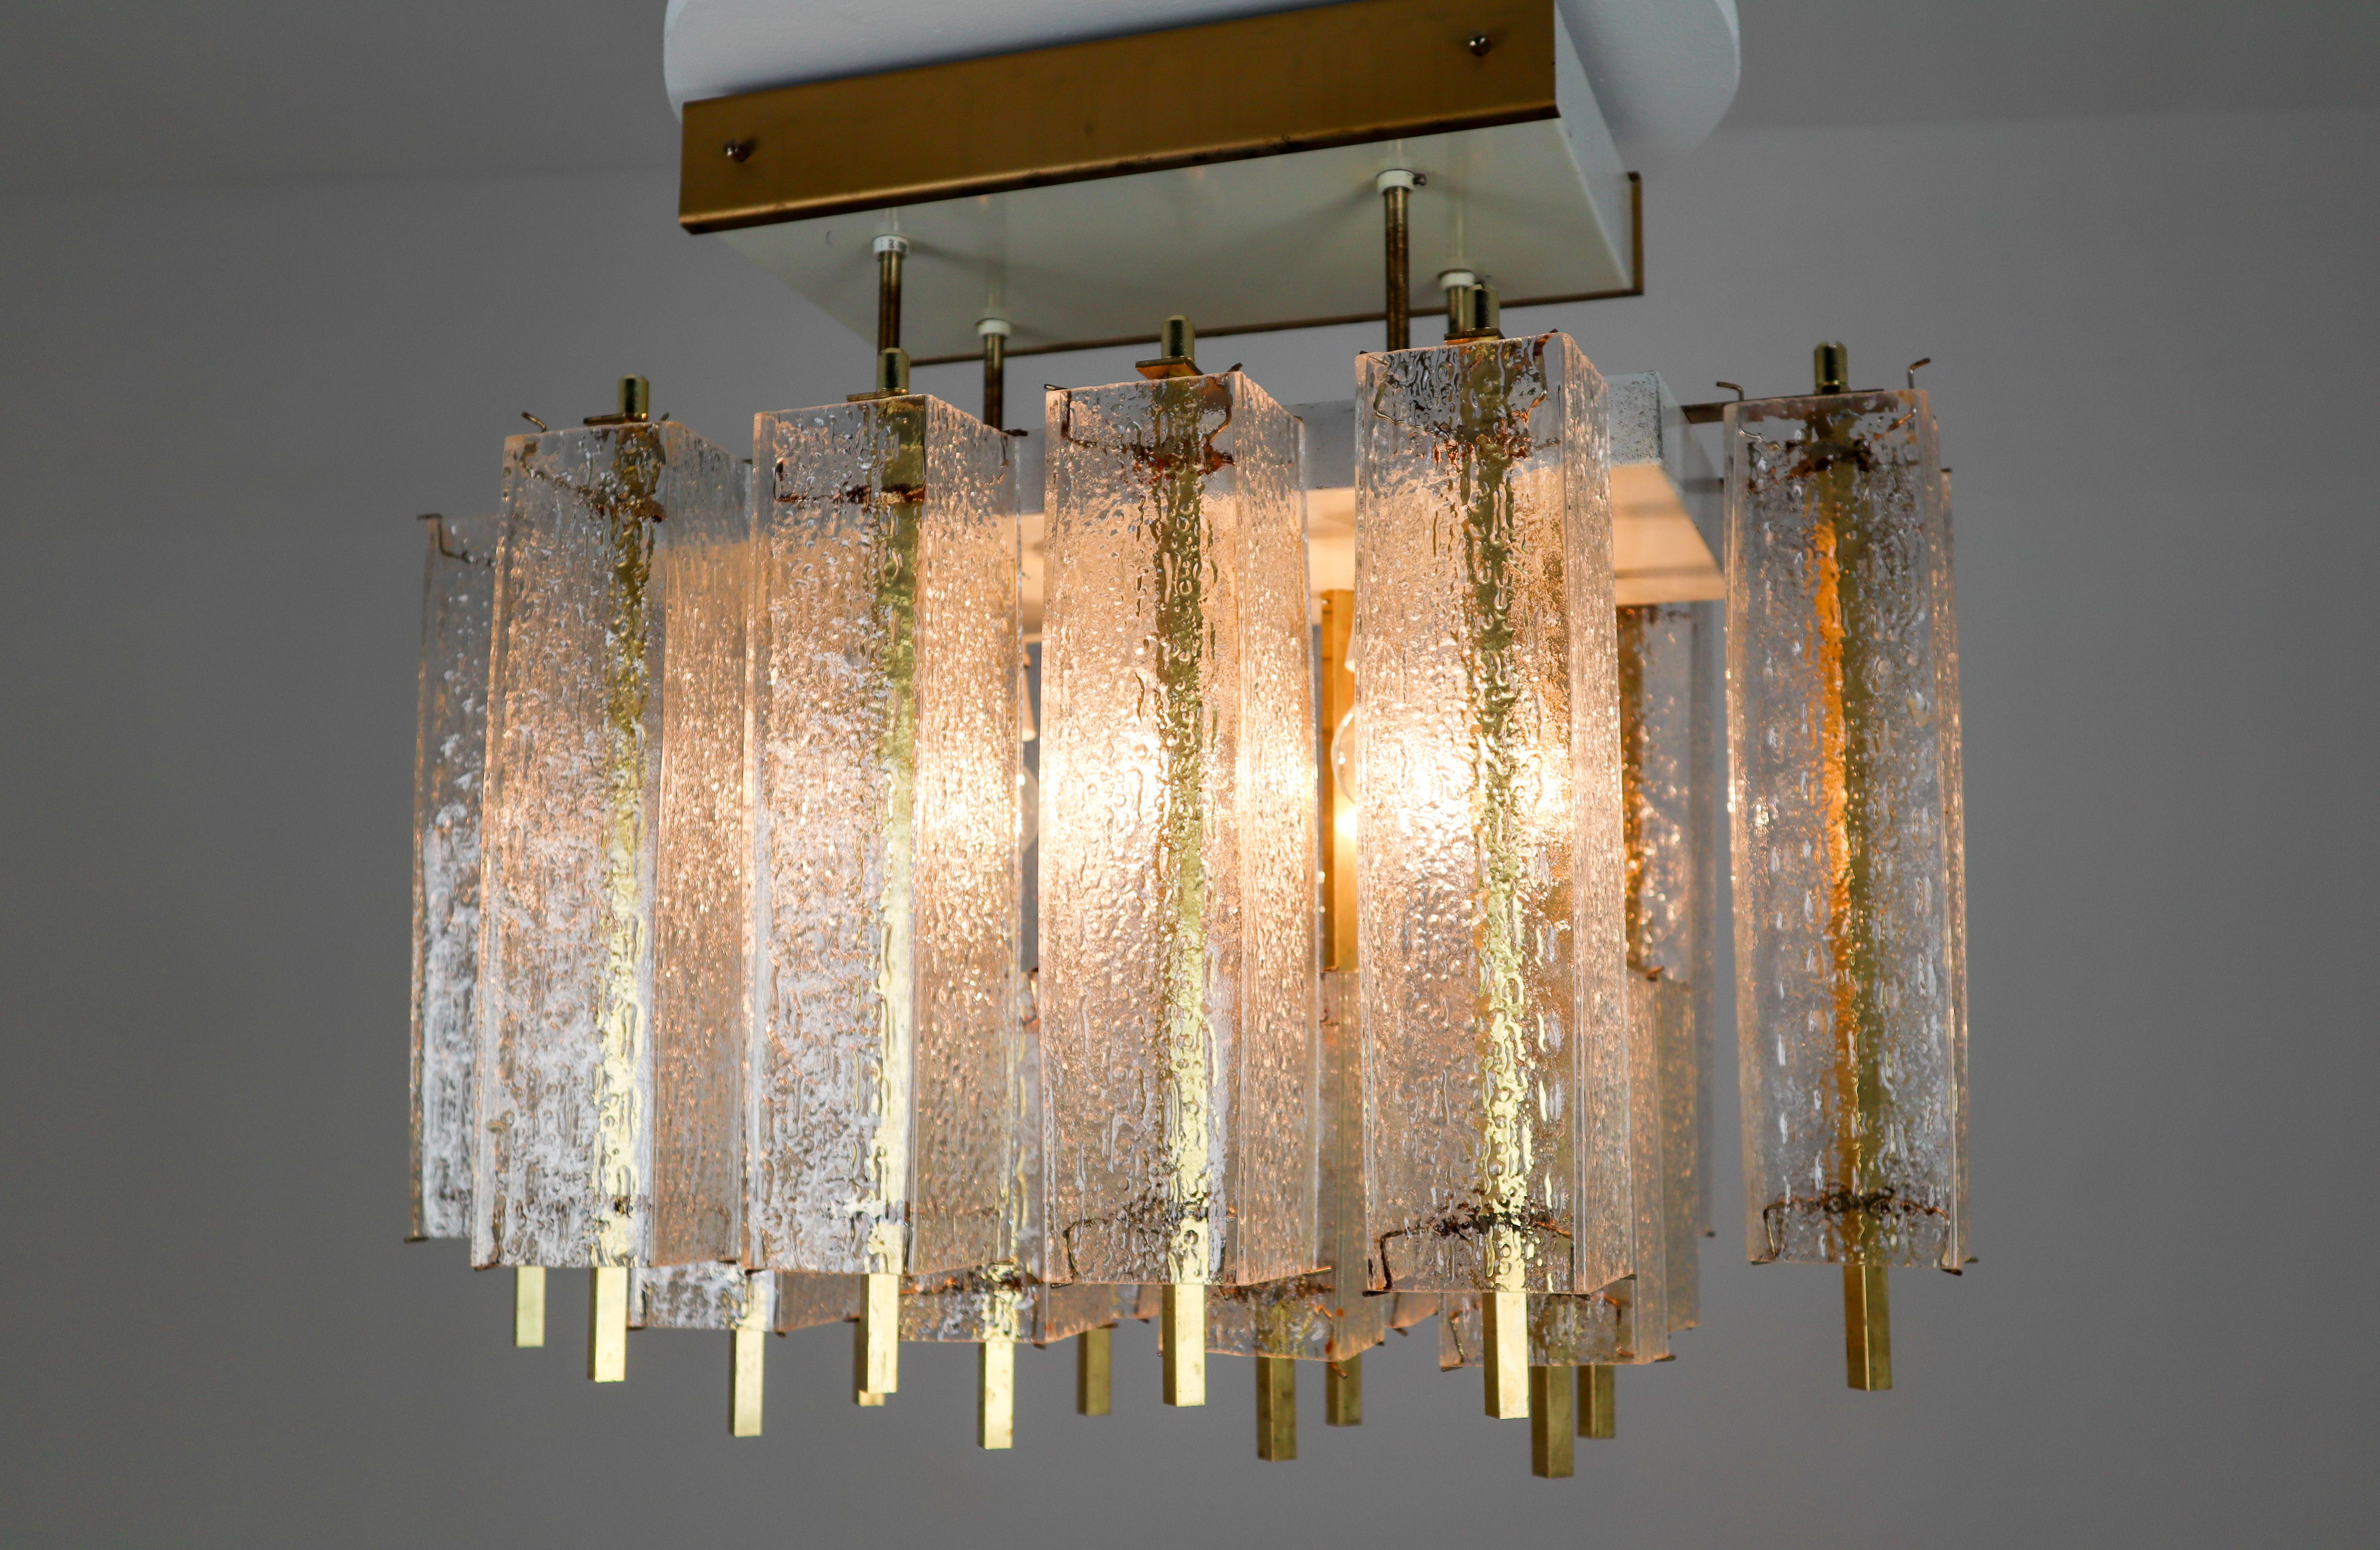 1 of 9 Large Midcentury Chandelier with Structured Glass and Brass Frame, 1960s For Sale 9